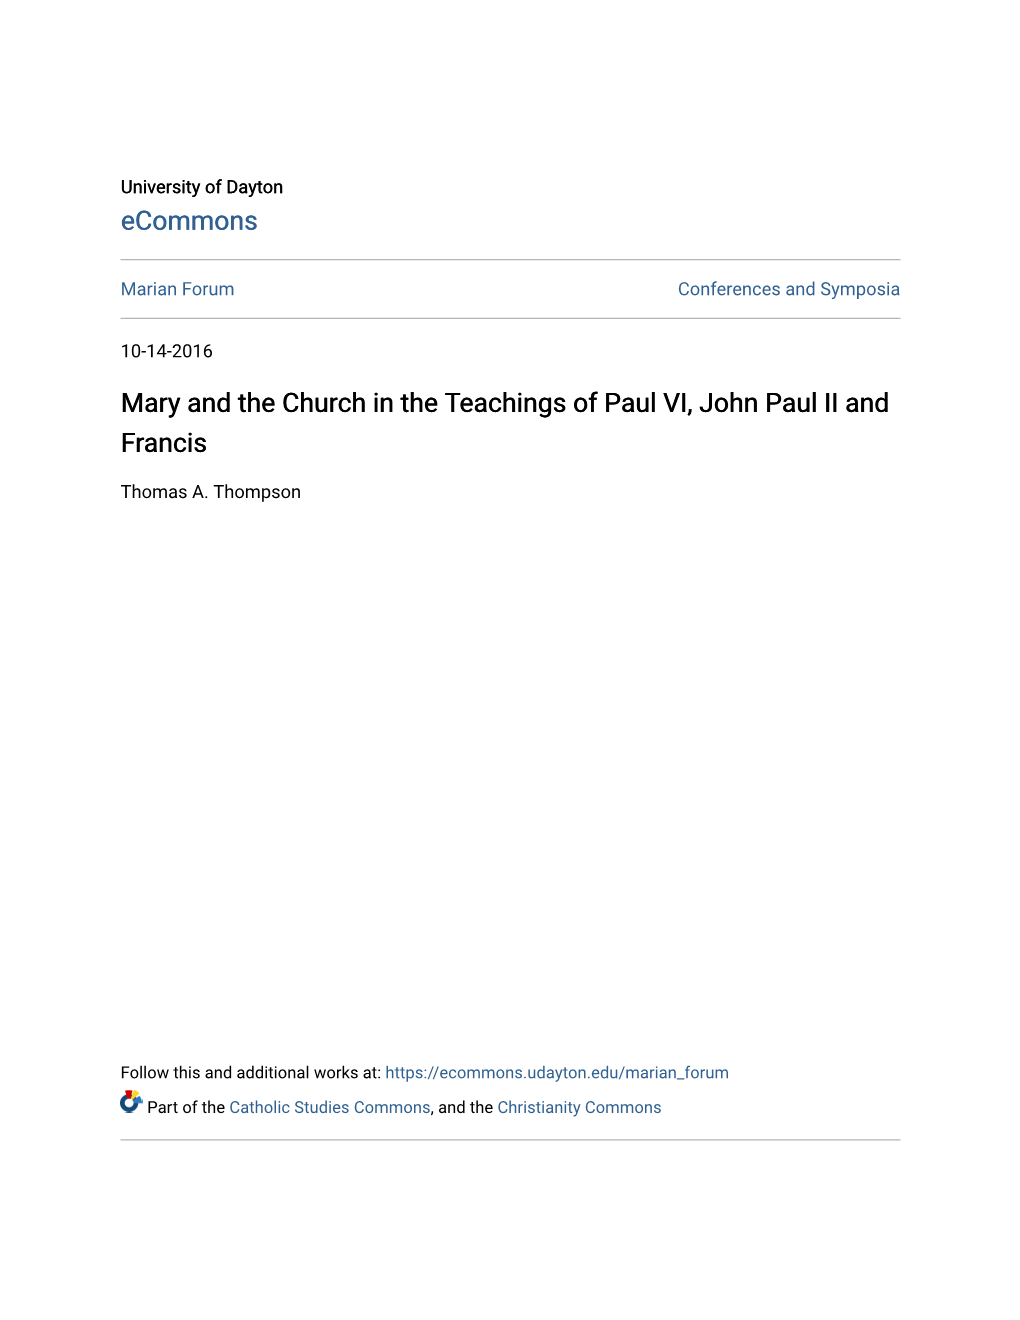 Mary and the Church in the Teachings of Paul VI, John Paul II and Francis